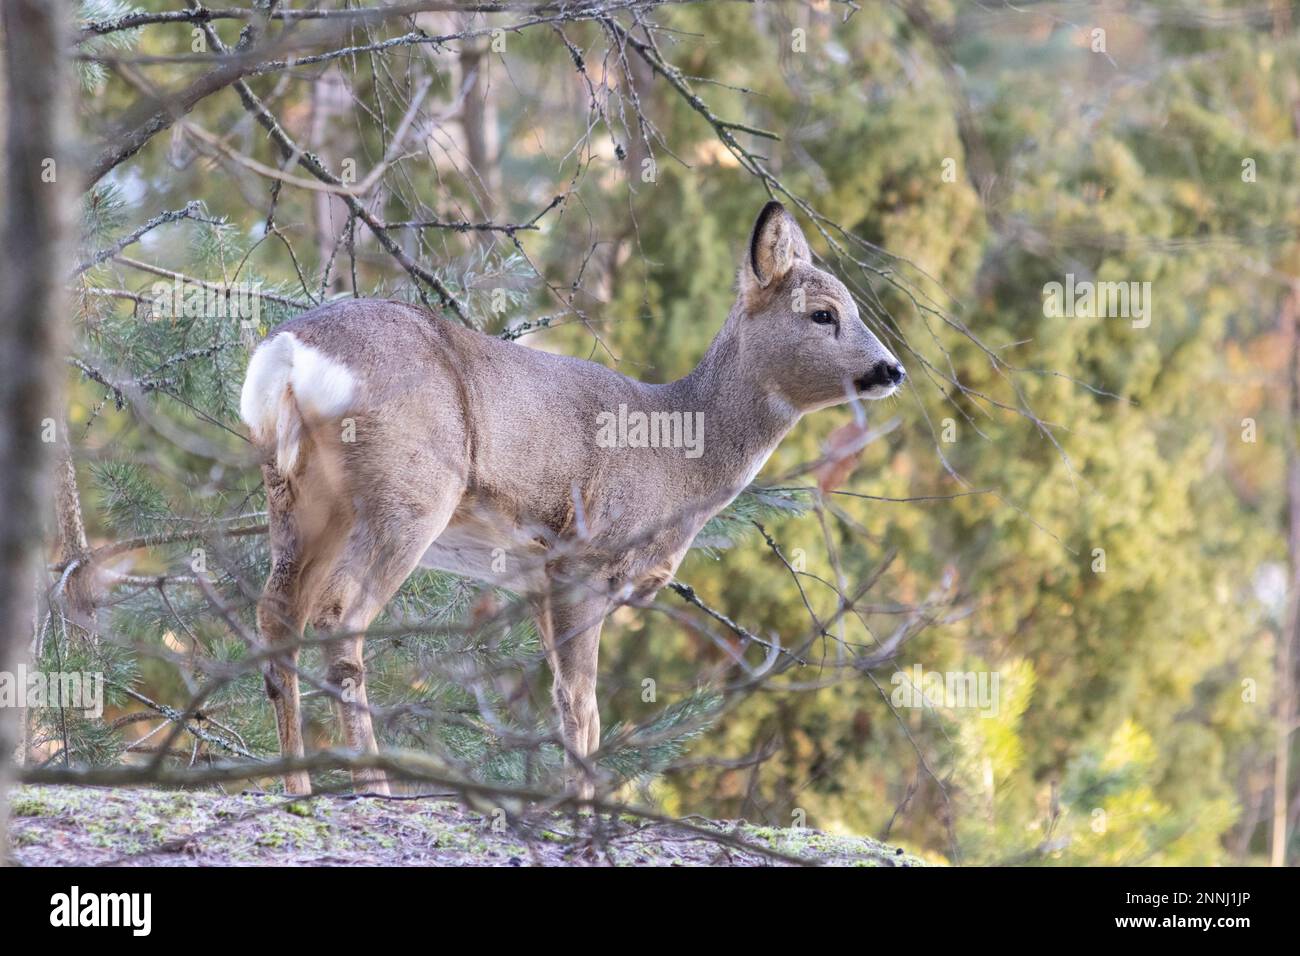 Roe deer in forest Stock Photo